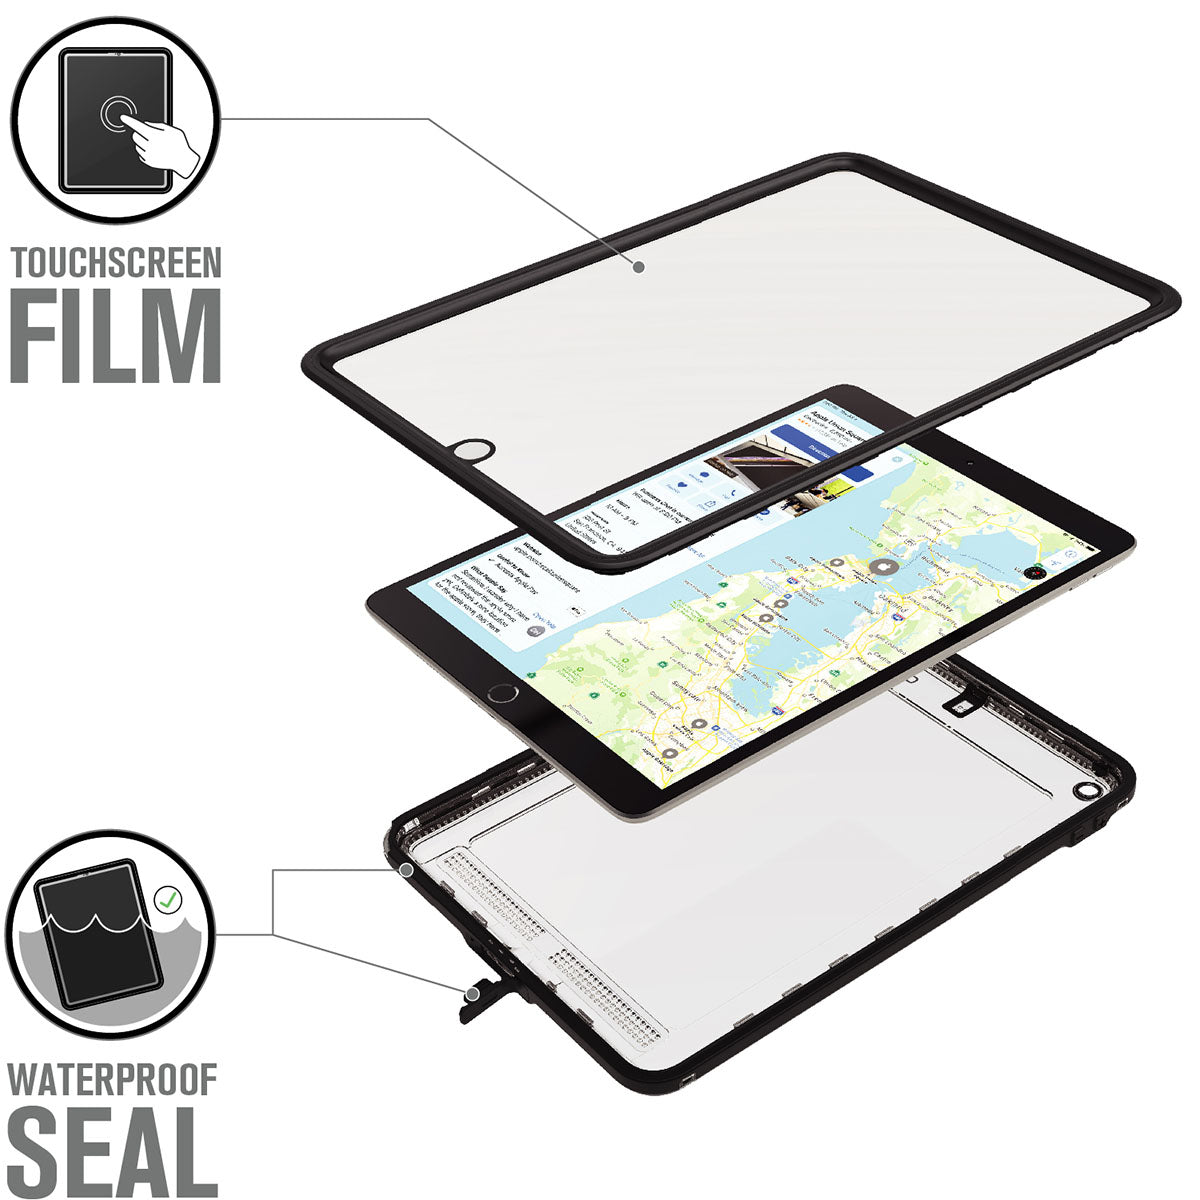 catalyst ipad air gen 3 10.5 waterproof case stealth black disassembled case with ipad text reads touchscreen film waterproof seal